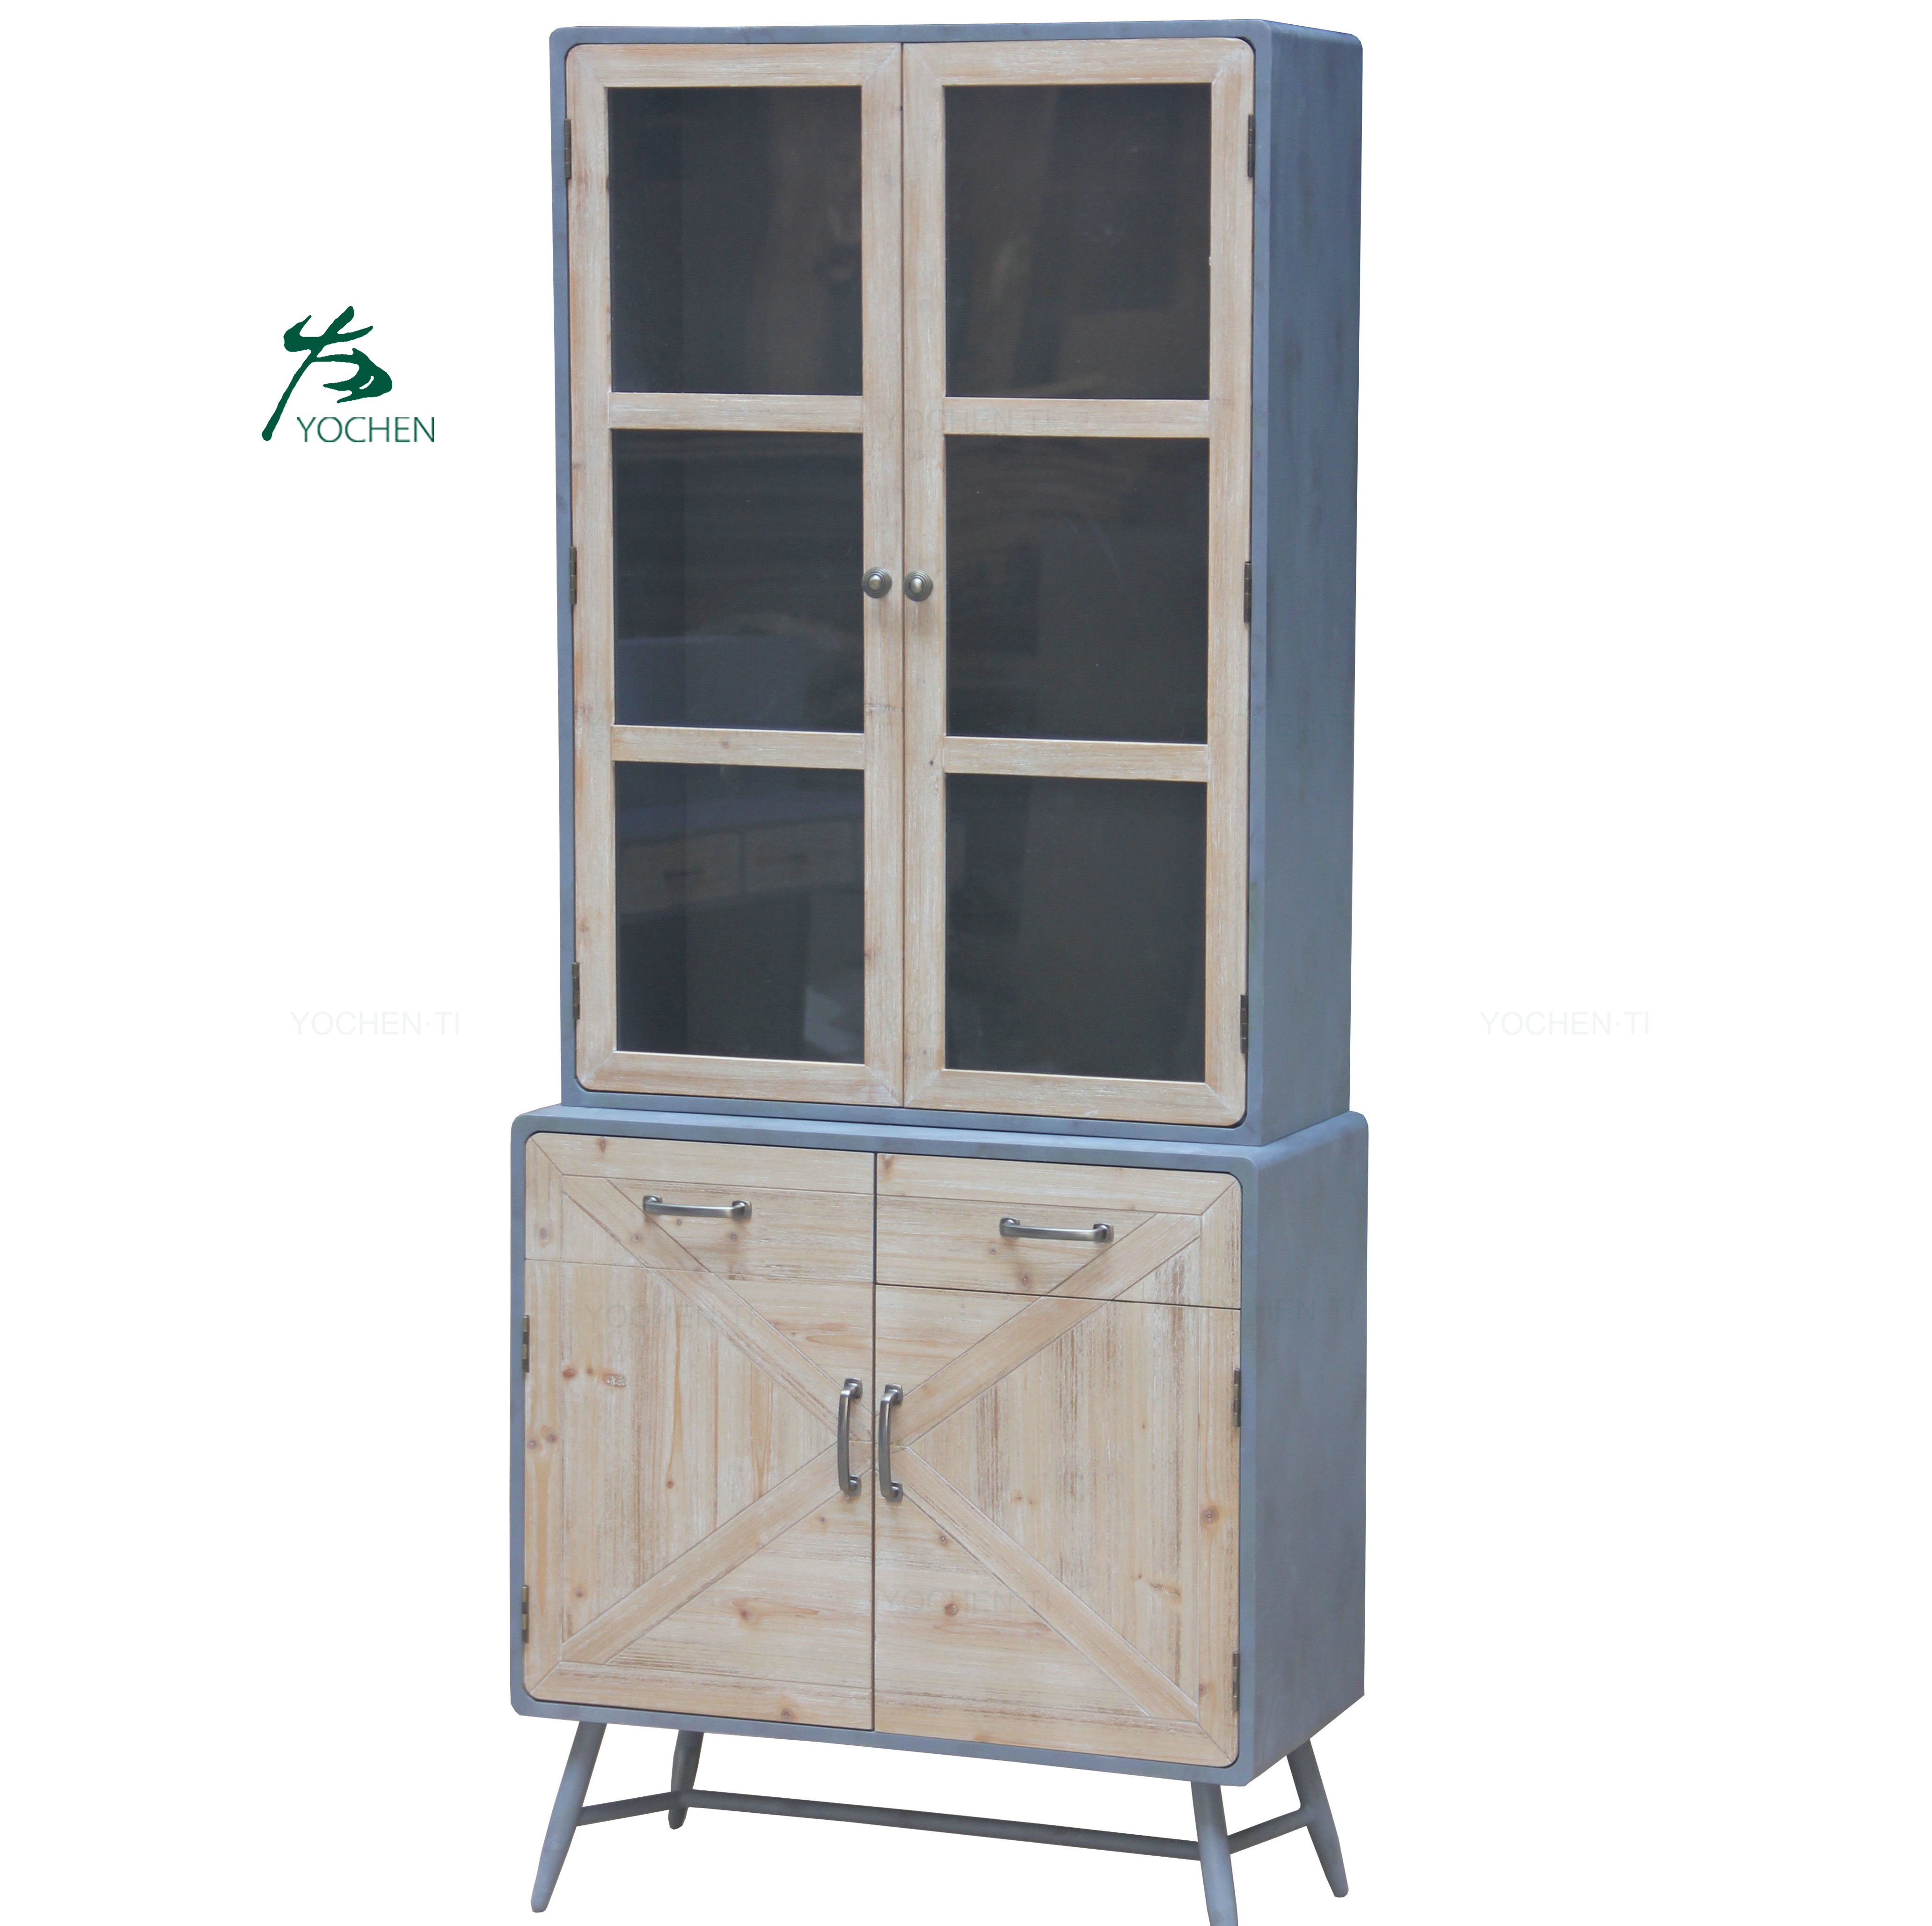 OEM customized low MOQ iron wooden industrial cheap book cabinet